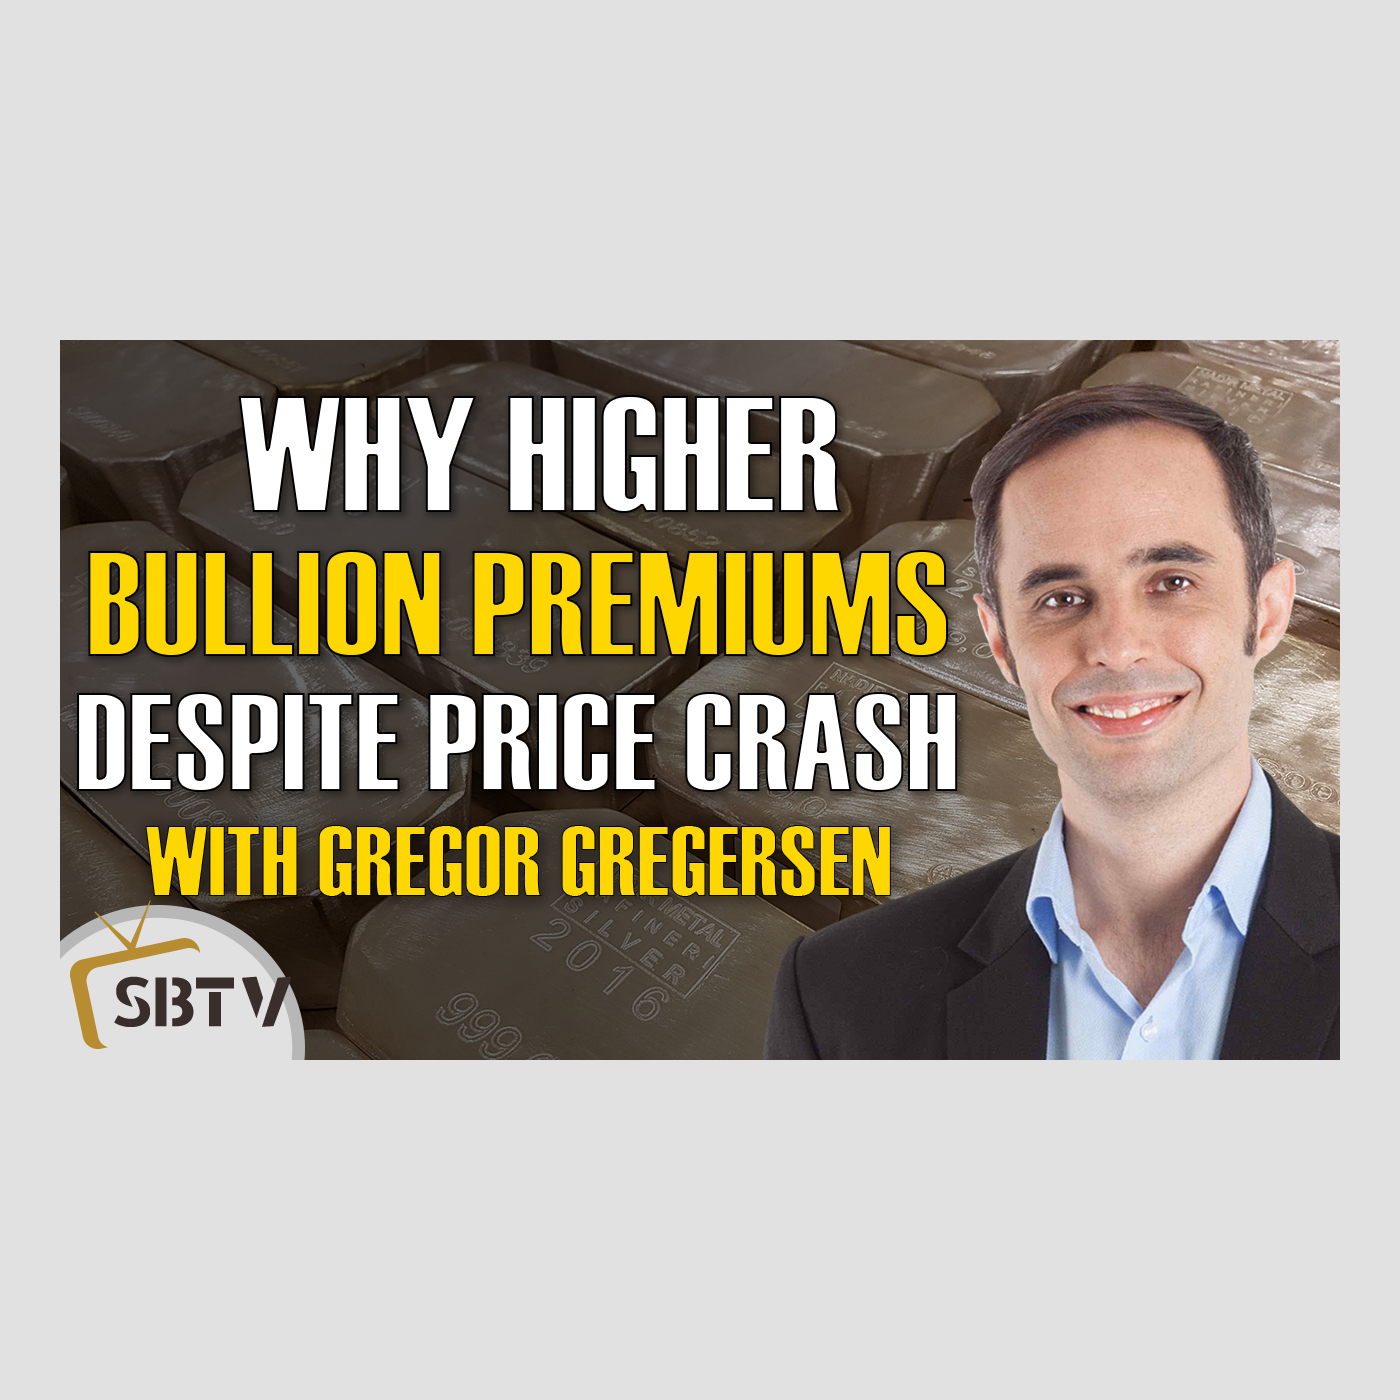 104 Gregor Gregersen - Physical Gold and Silver Market: Why Premiums Rise Despite Massive Crash In Prices